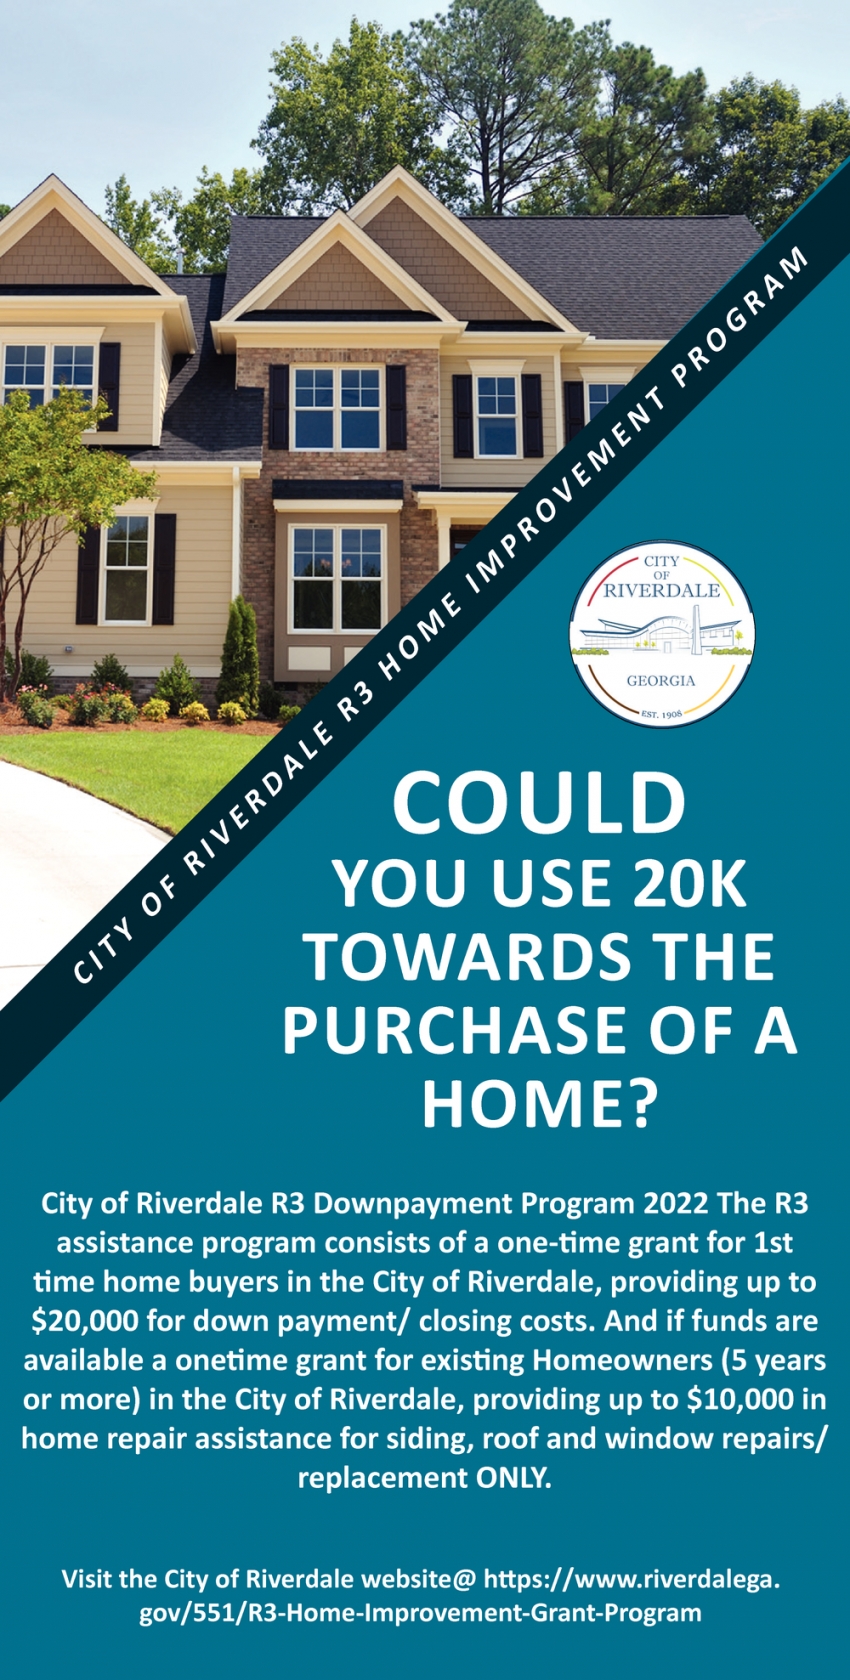 Could You Use 20k Towards The Purchase of a Home?